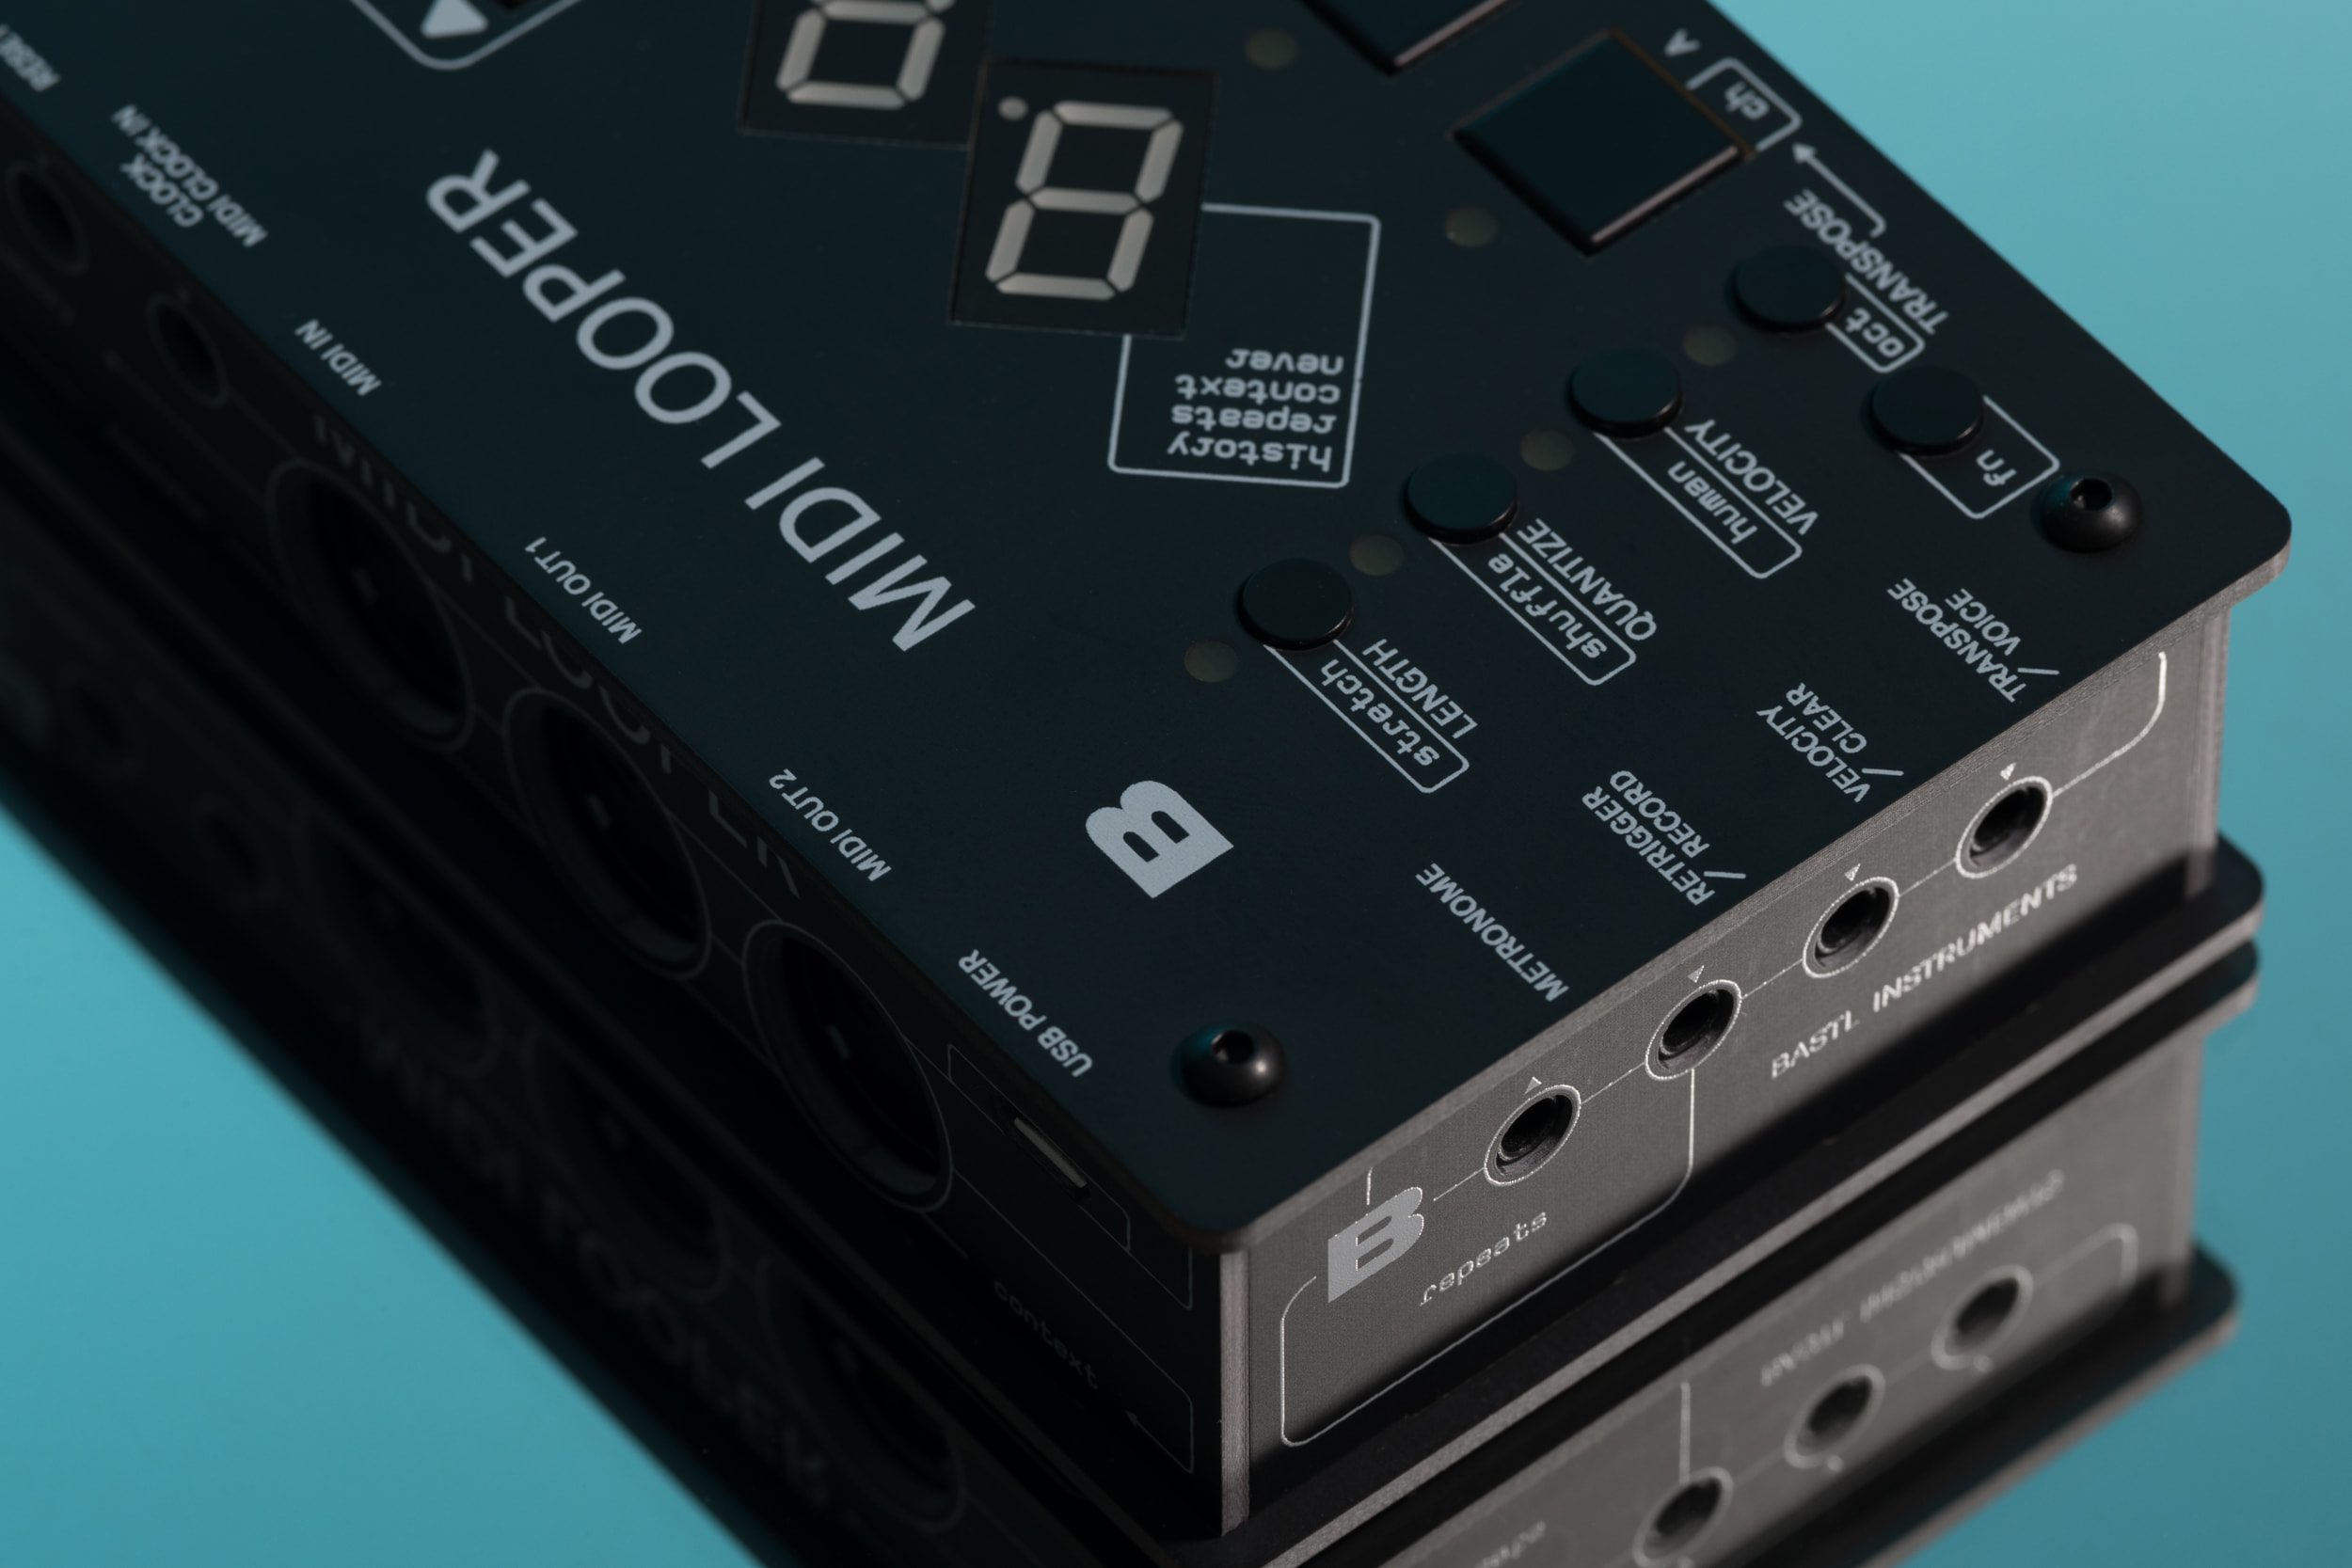 Bastl Midilooper – Flex your muscles with speedy, open-ended MIDI